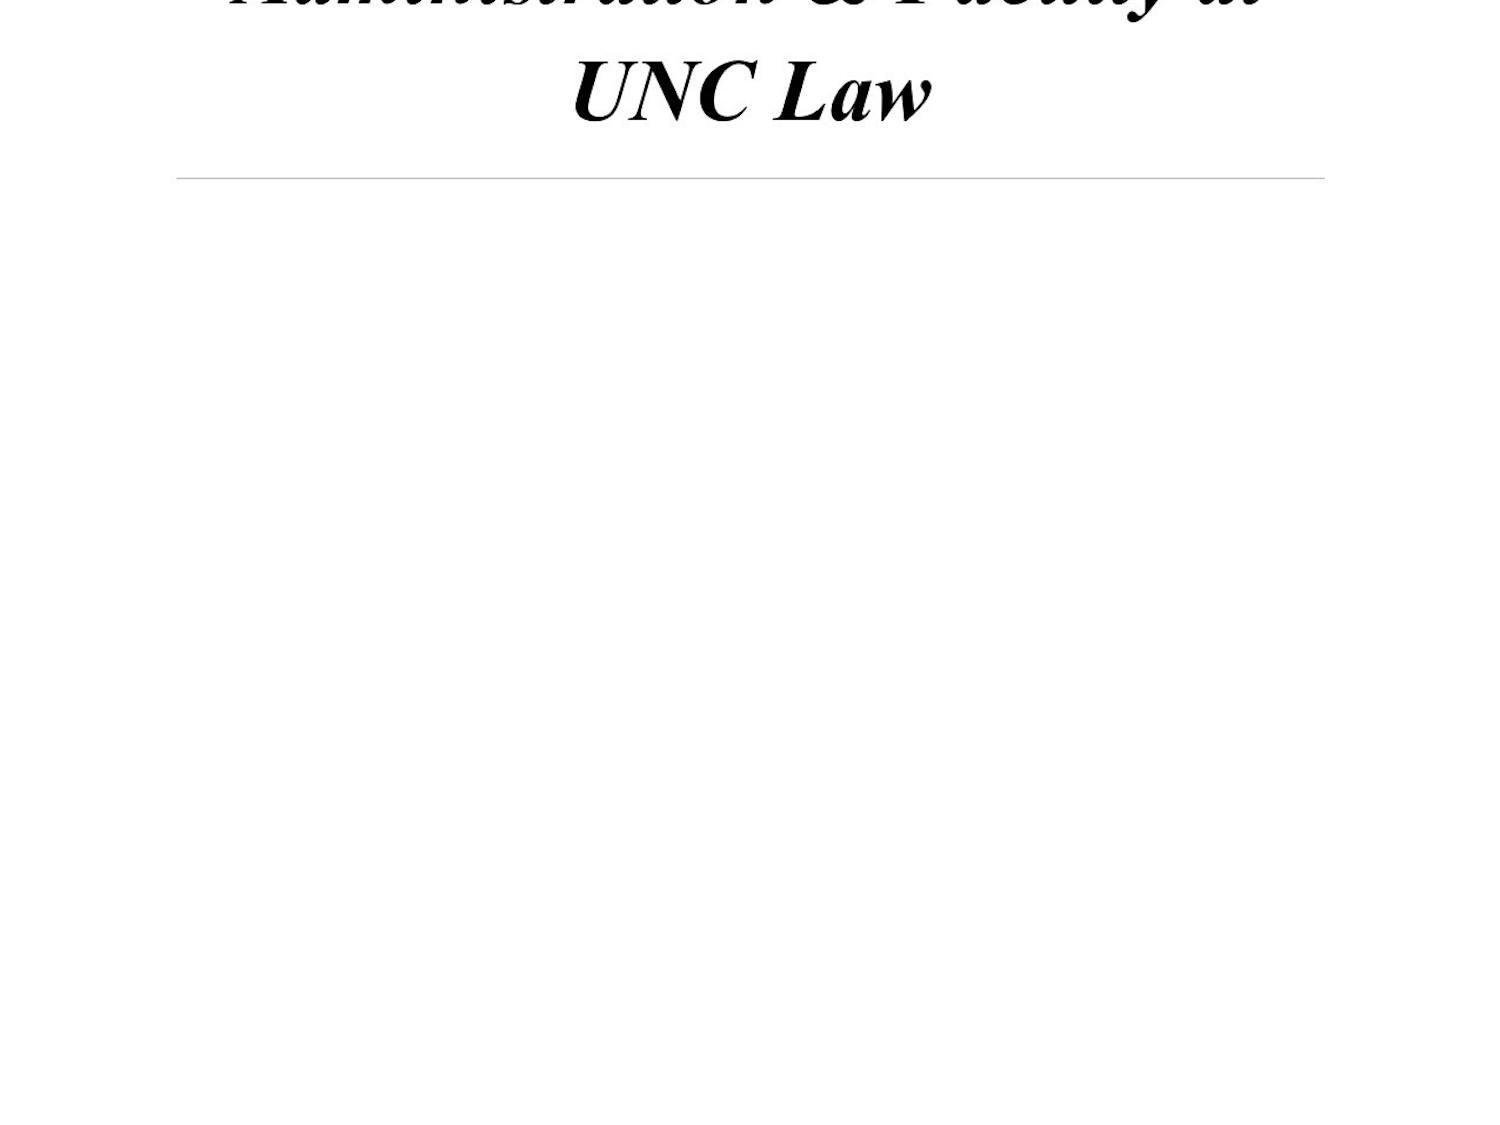 BLSA’s Expectations of Administration & Faculty at UNC Law